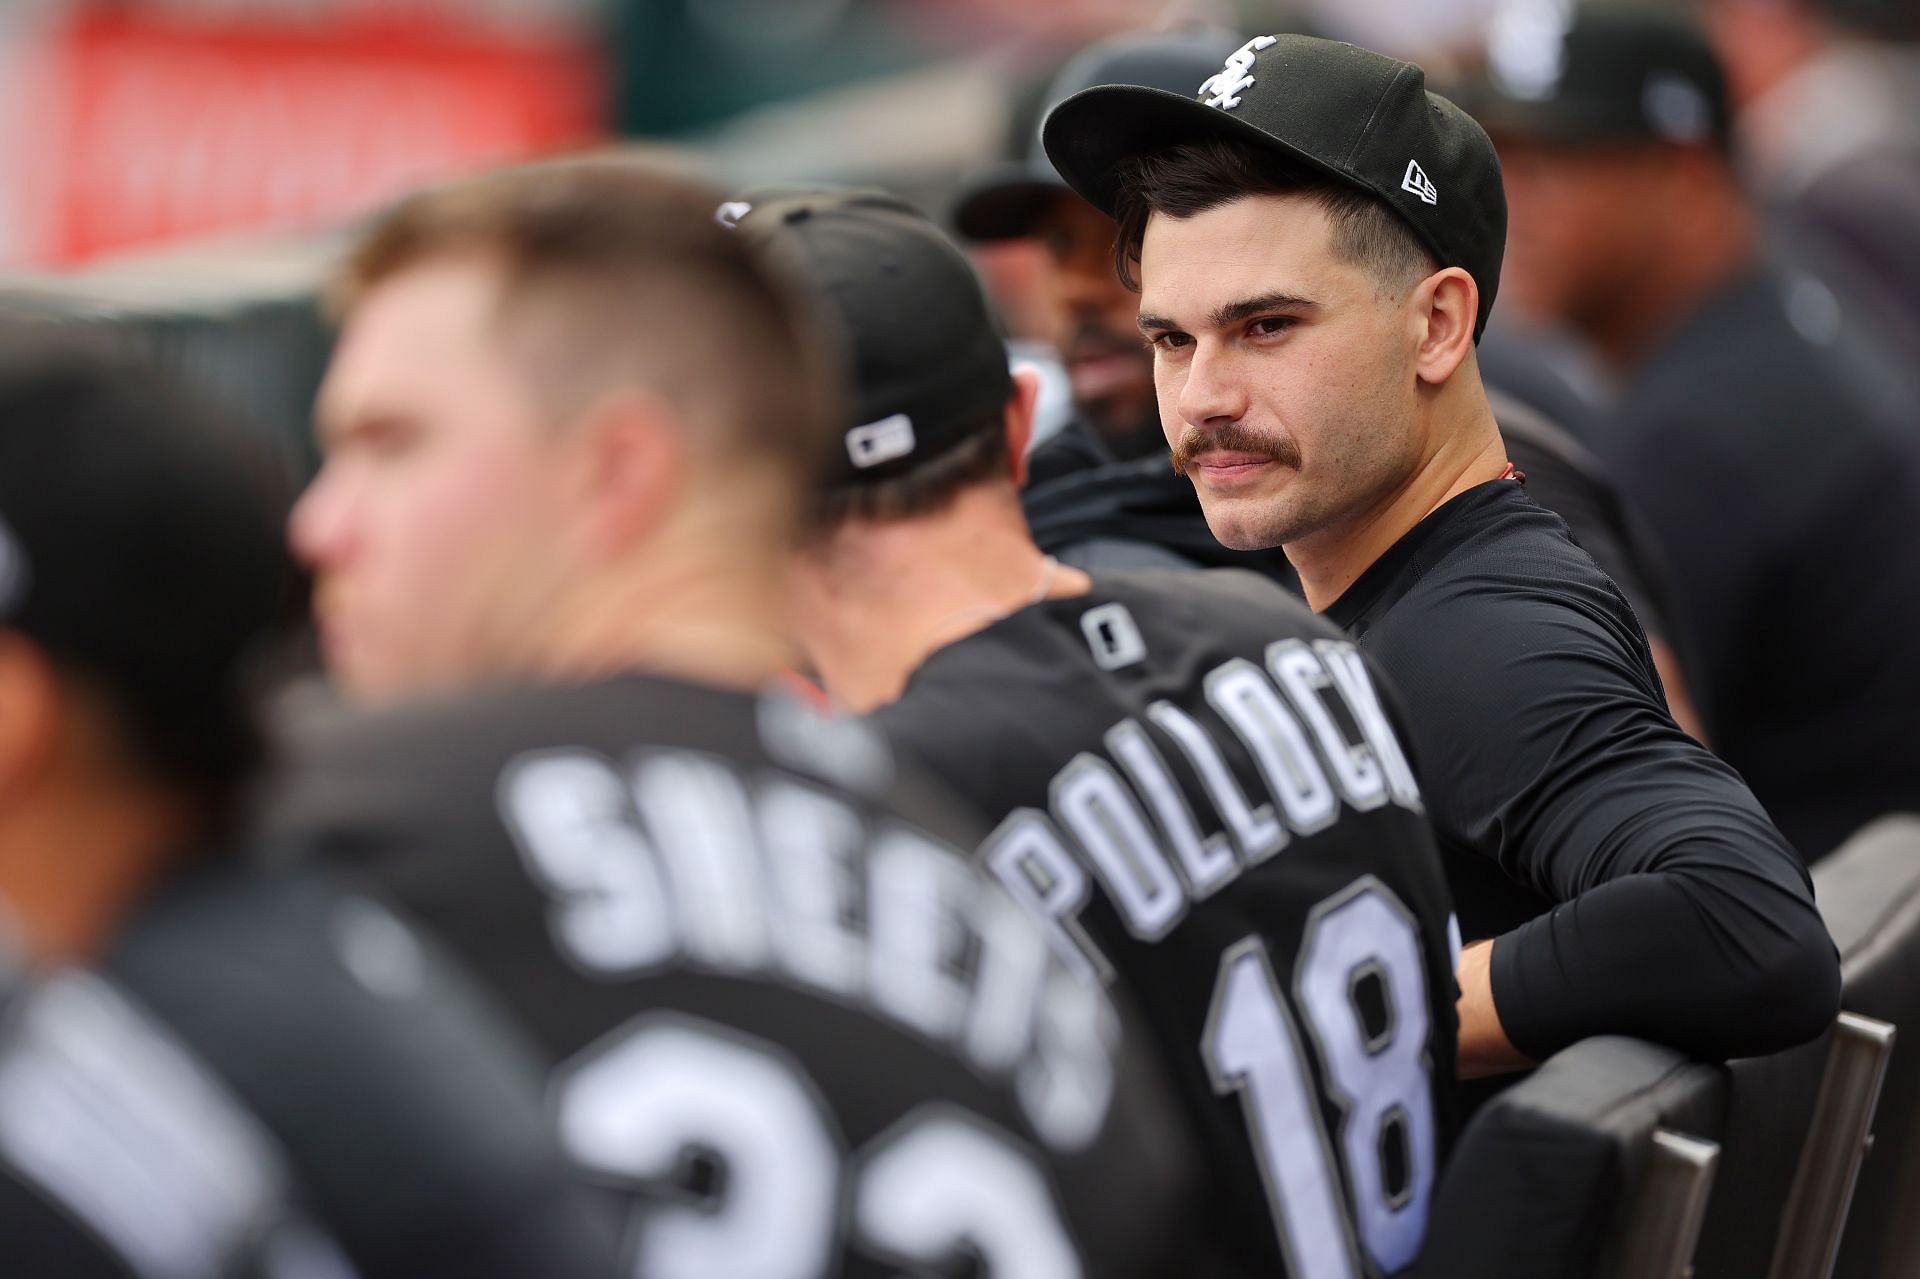 Latino White Sox fans feel embraced by the team